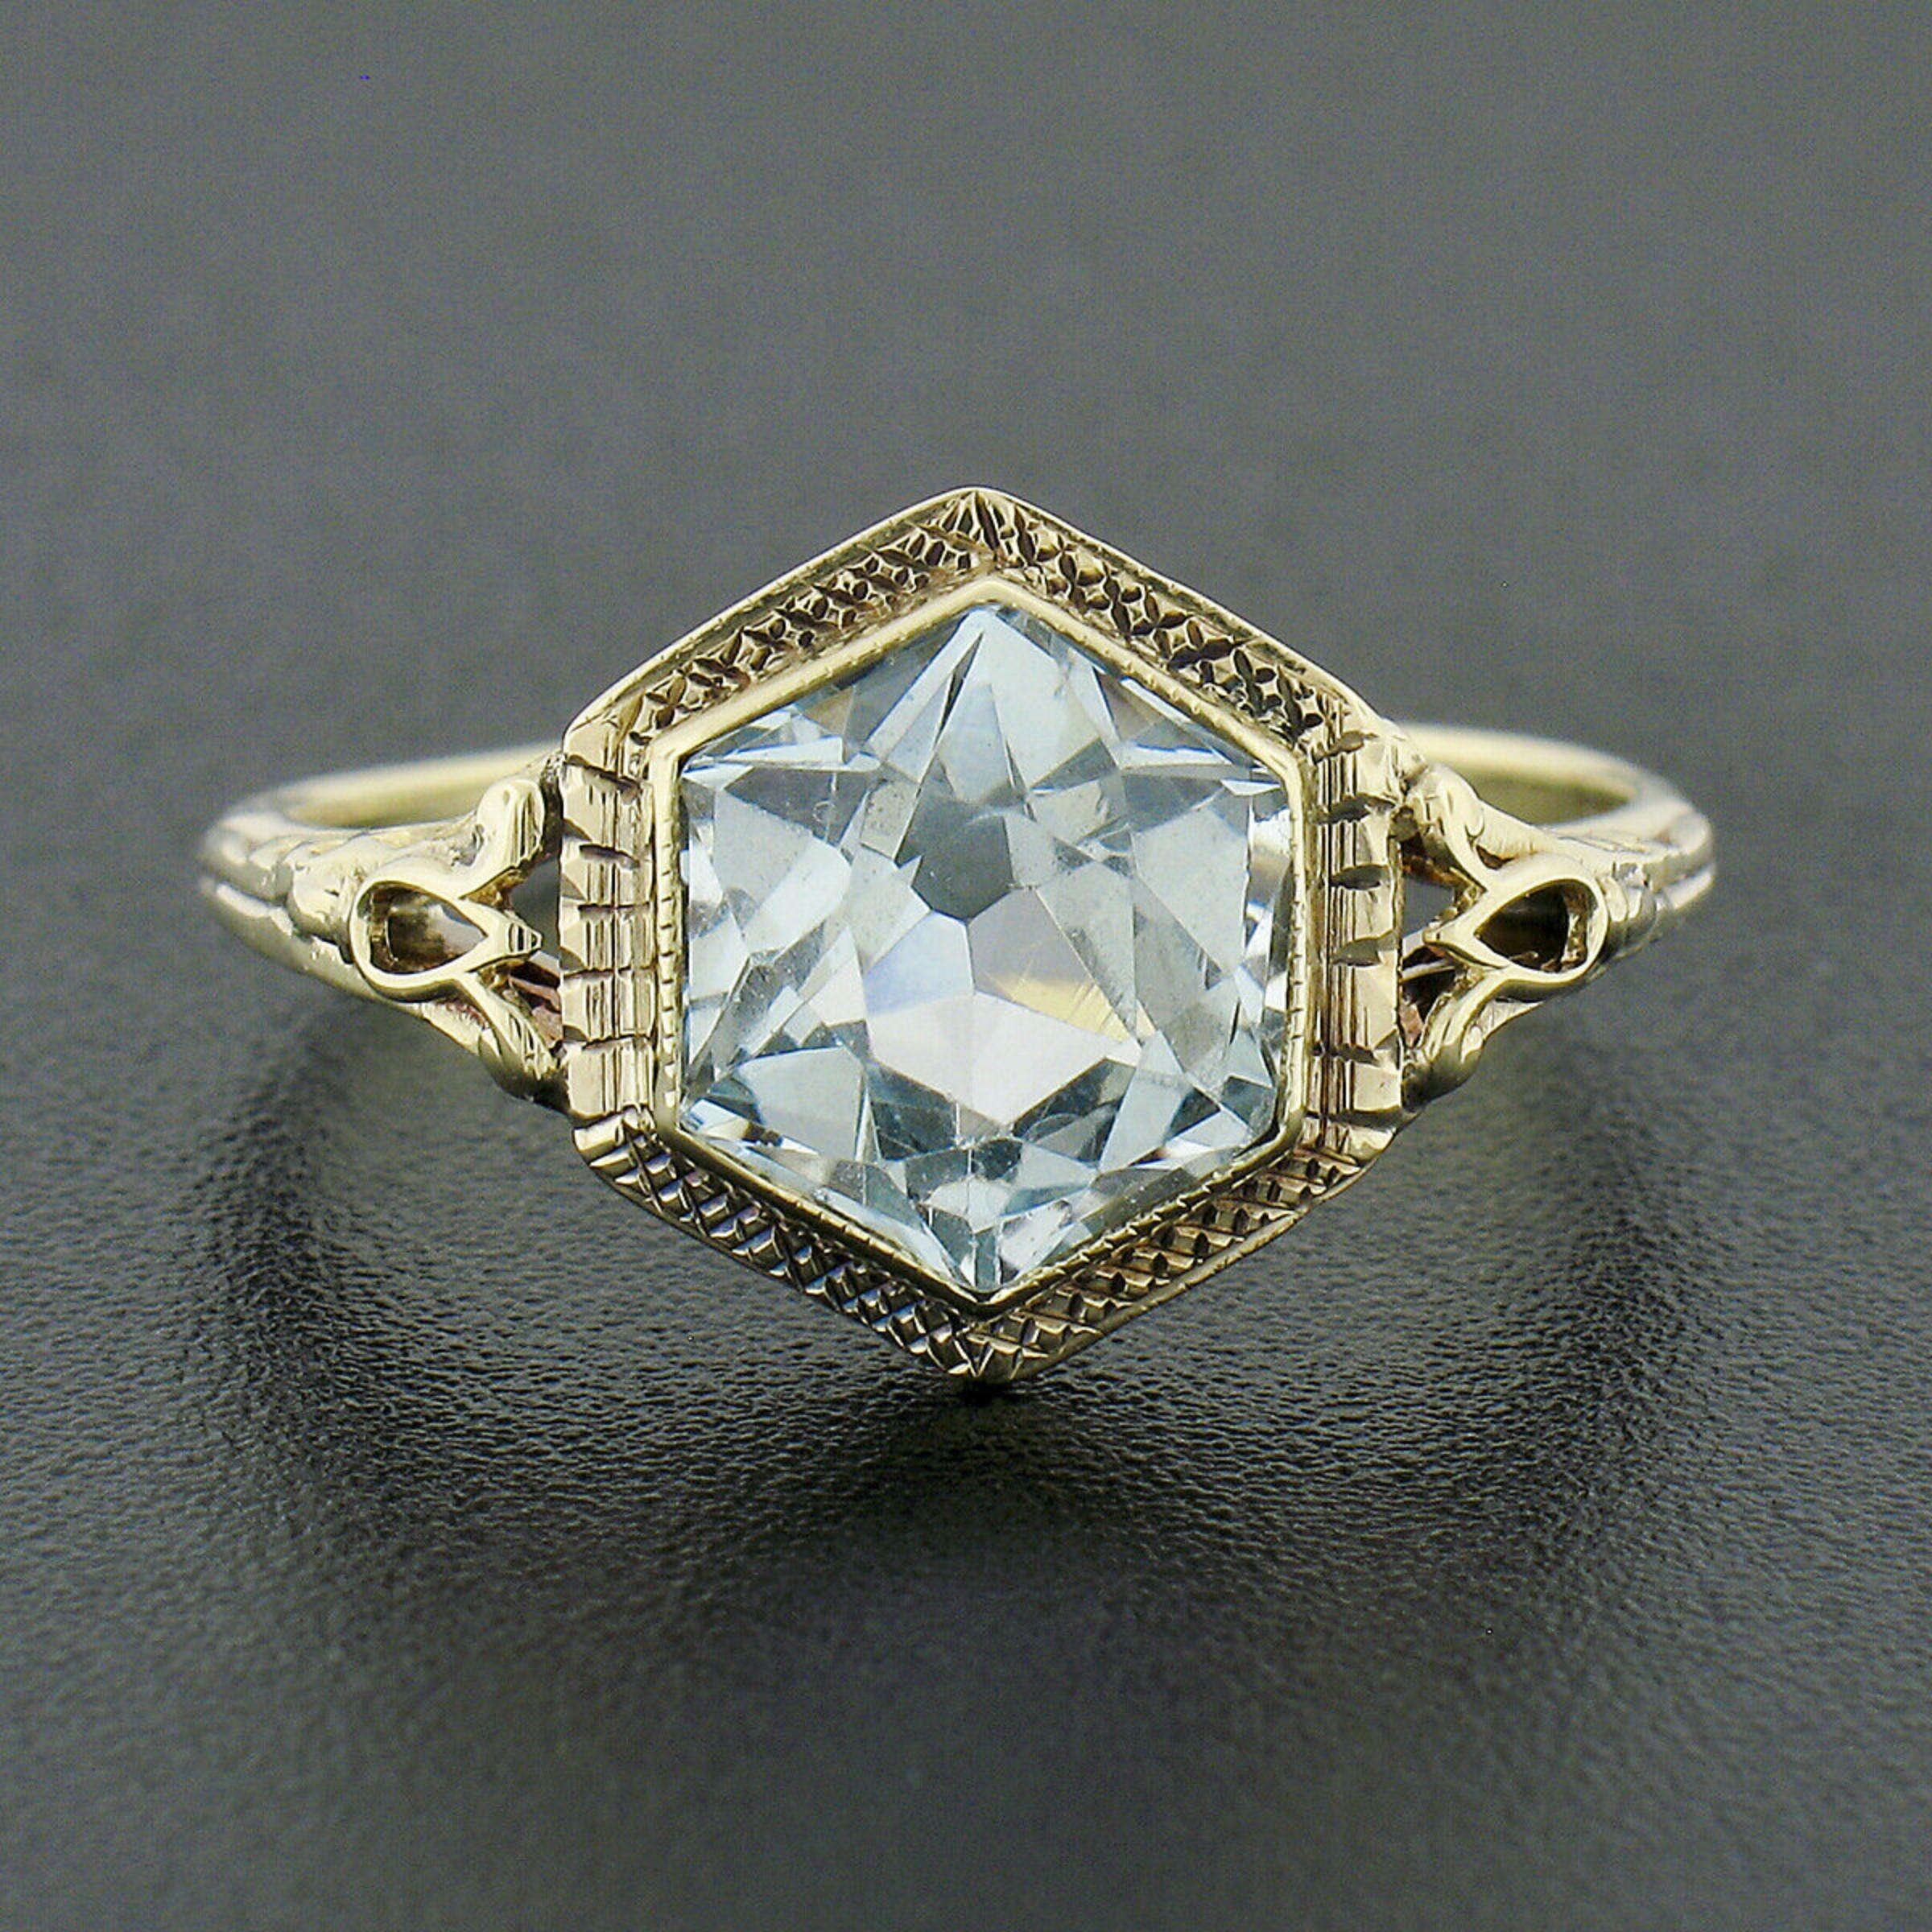 This is an absolutely gorgeous antique ring that was crafted in solid 14k yellow gold during the art deco period. It features a stunning custom hexagon cut aquamarine solitaire that is neatly bezel set at the center, showing a beautiful transparent